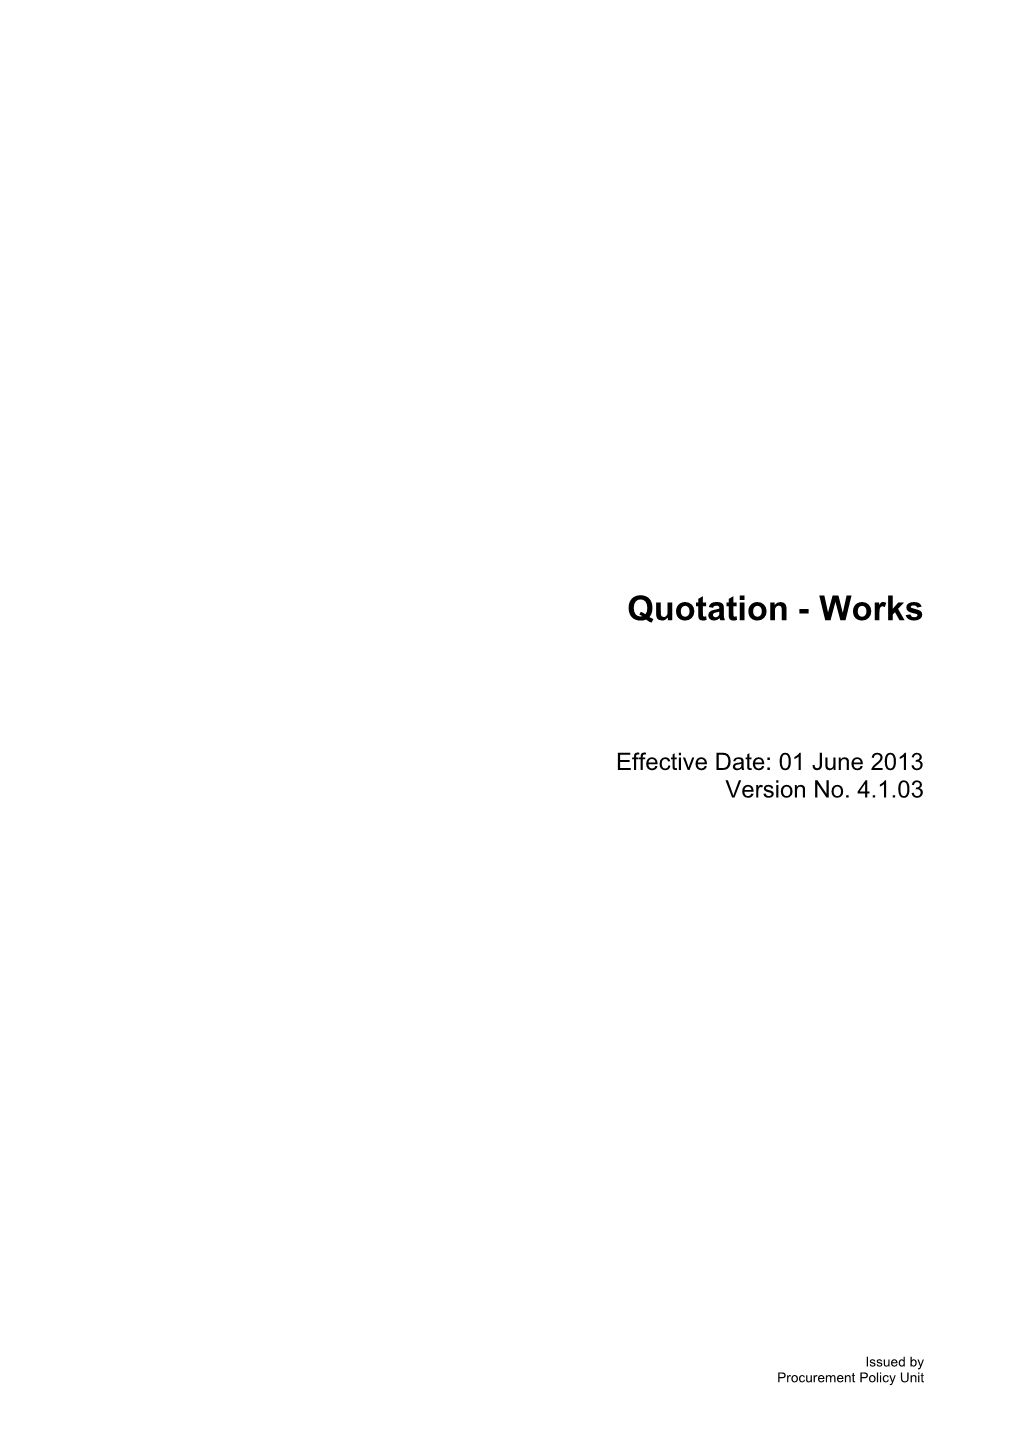 Conditions: Quoting and Contract - Quotation Works - V 4.1.03 (01 June 2013)